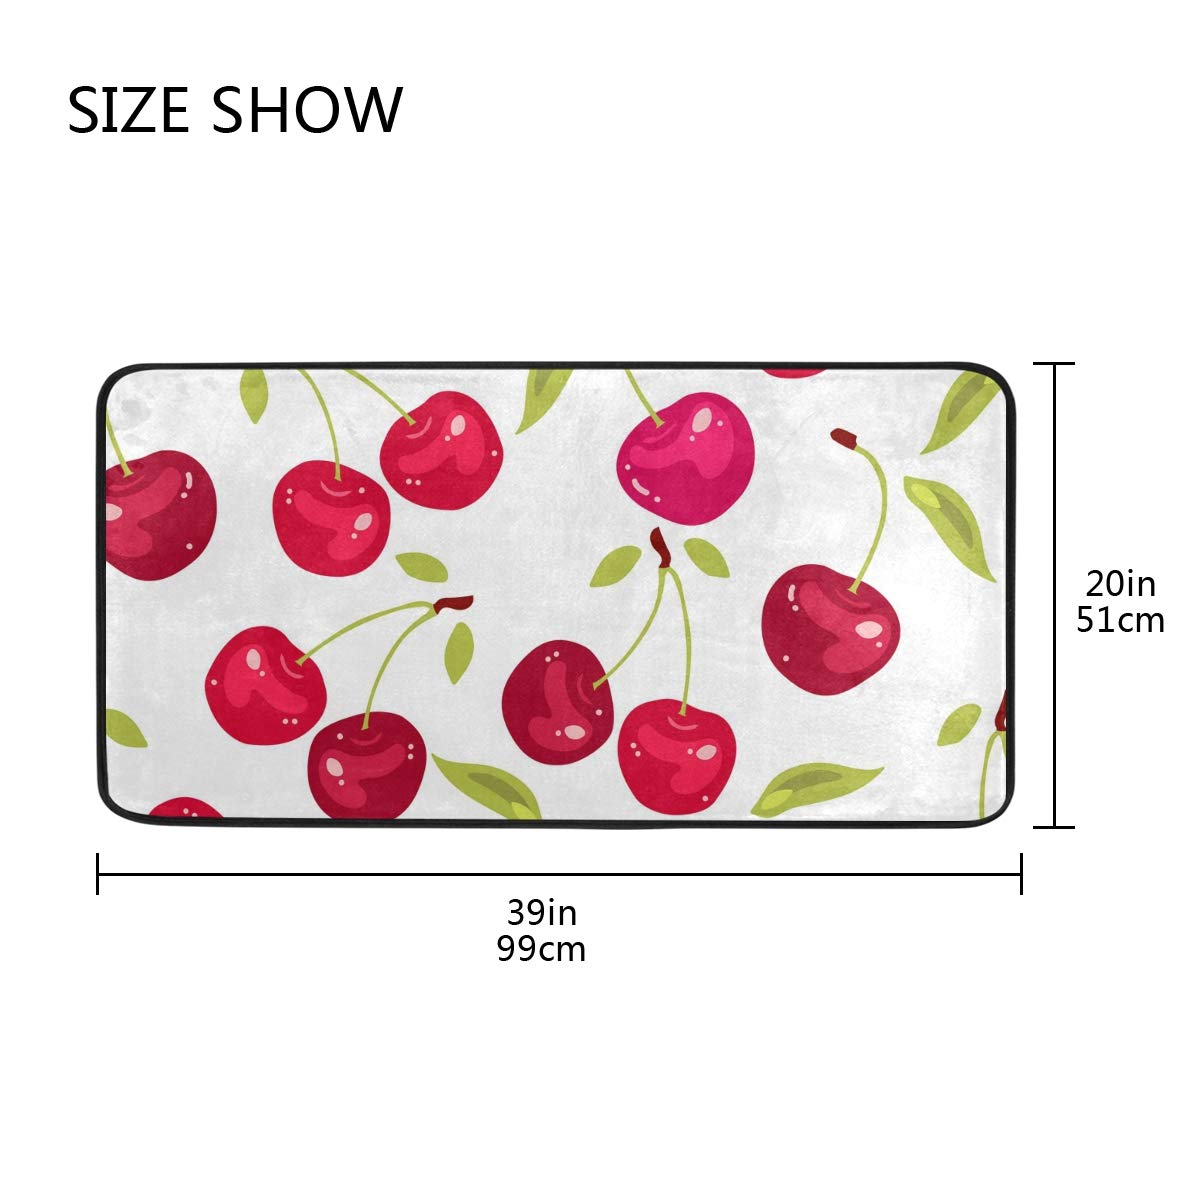 ZZAEO Seamless Pattern With Cherry Berries Kitchen Floor Mat Non Skid Area Rug Absorbent Soft Comfort Standing Mat Home Decor - 39 x 20 Inch